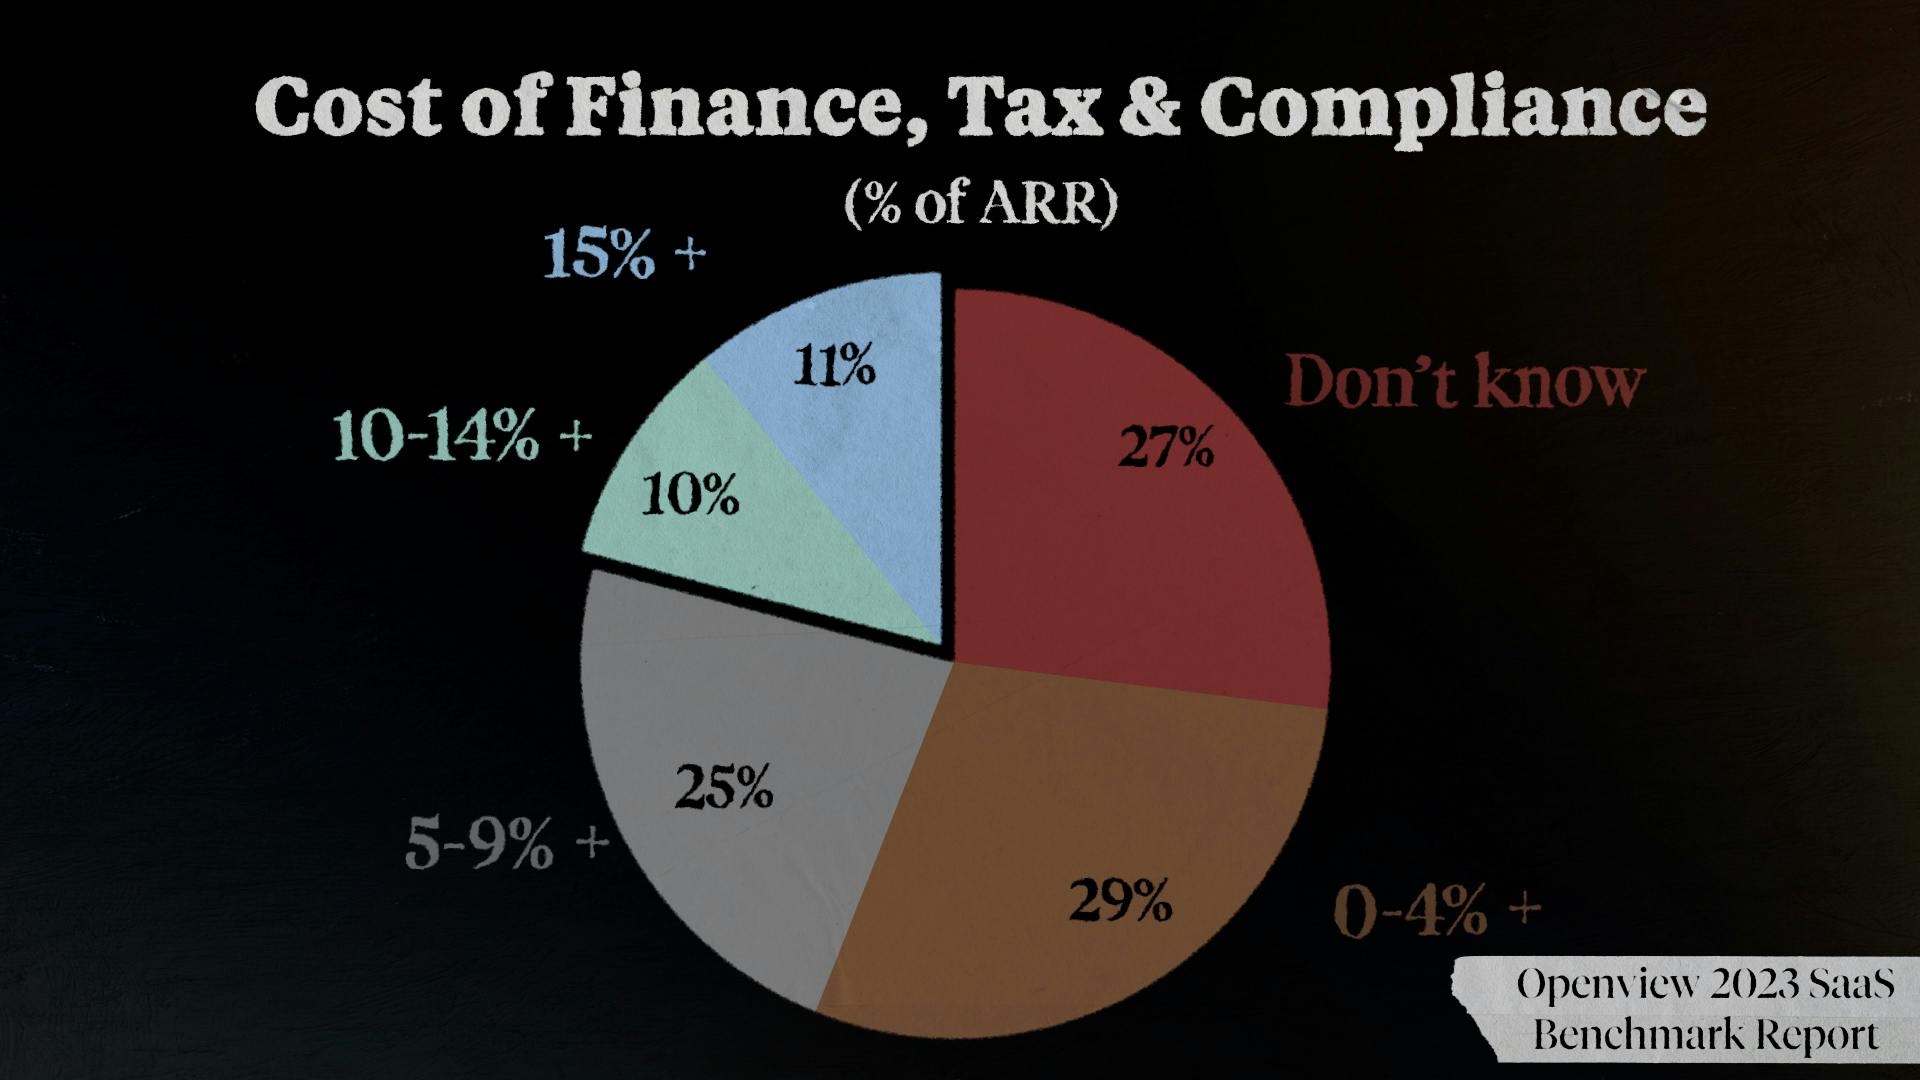 Cost of Finance, Tax & Compliance (% of ARR)